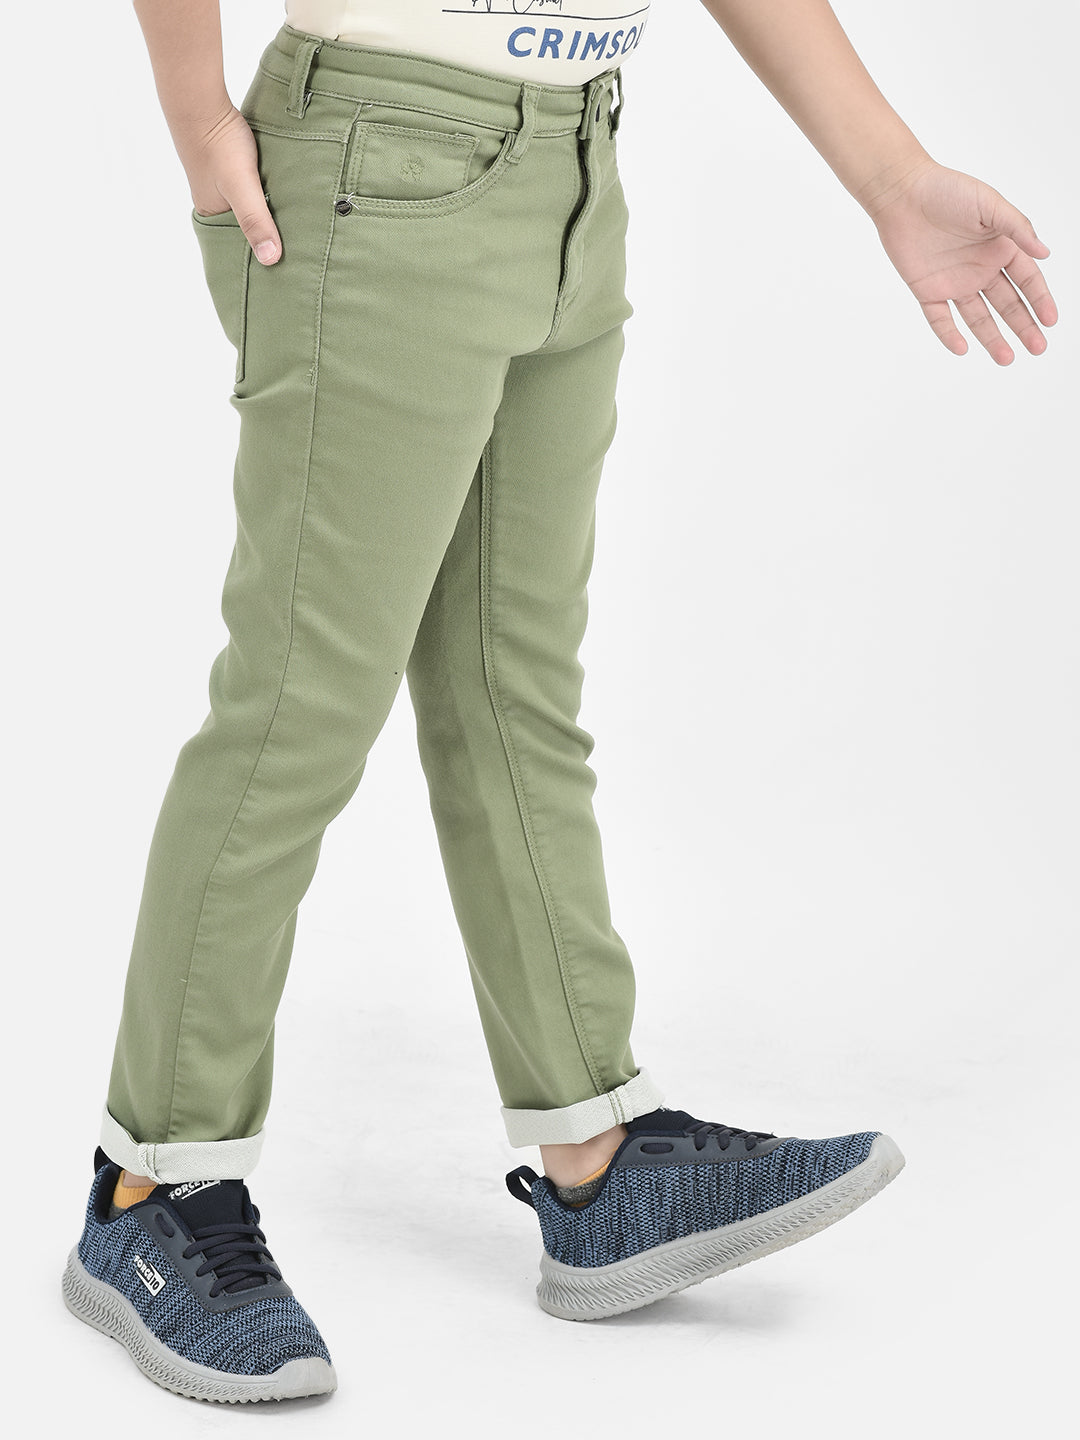  Olive Trousers in Denim Look